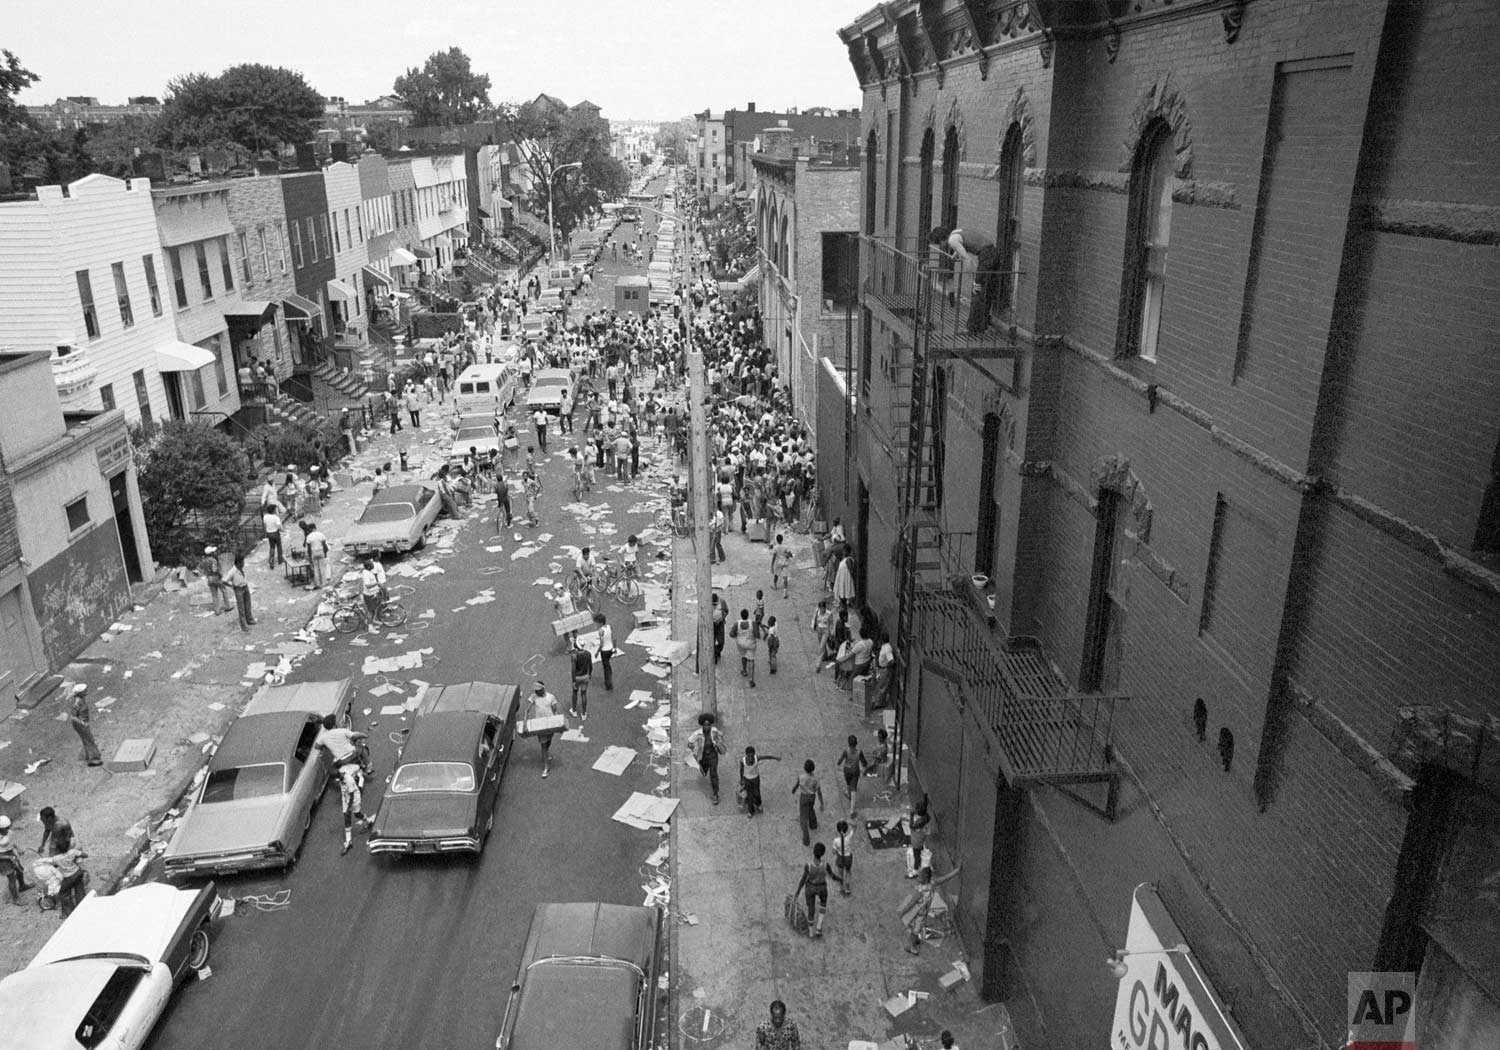  A street in the Bedford-Stuyvesant section of Brooklyn is full of people and debris, July 14, 1977 following last night's massive blackout in New York City. (AP Photo) 